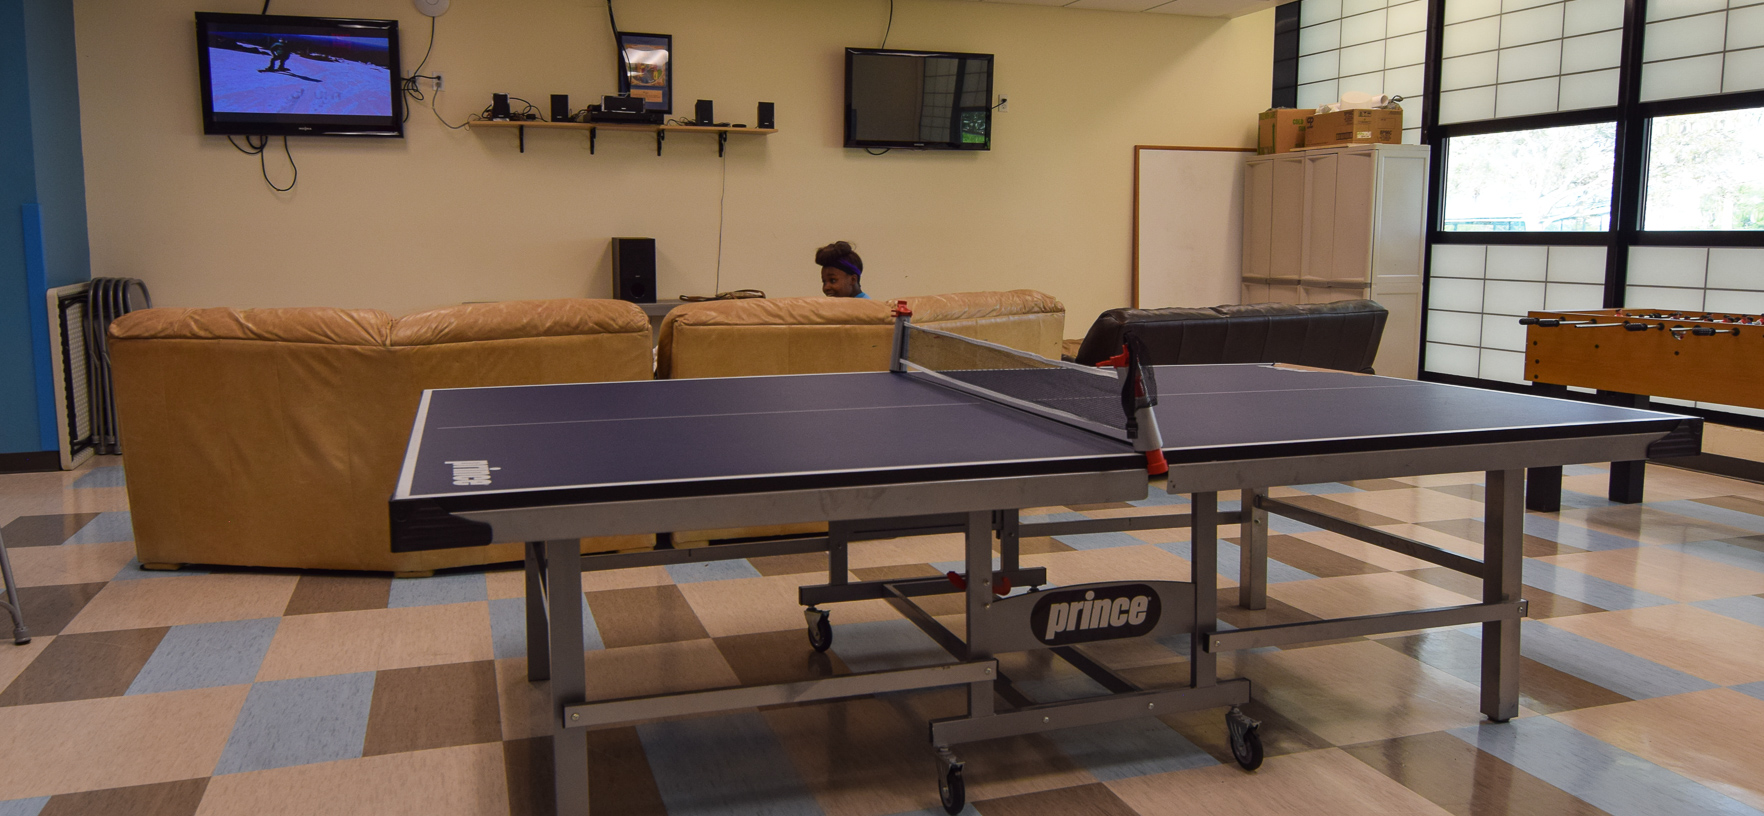 Campbell Park Teen Room with table tennis